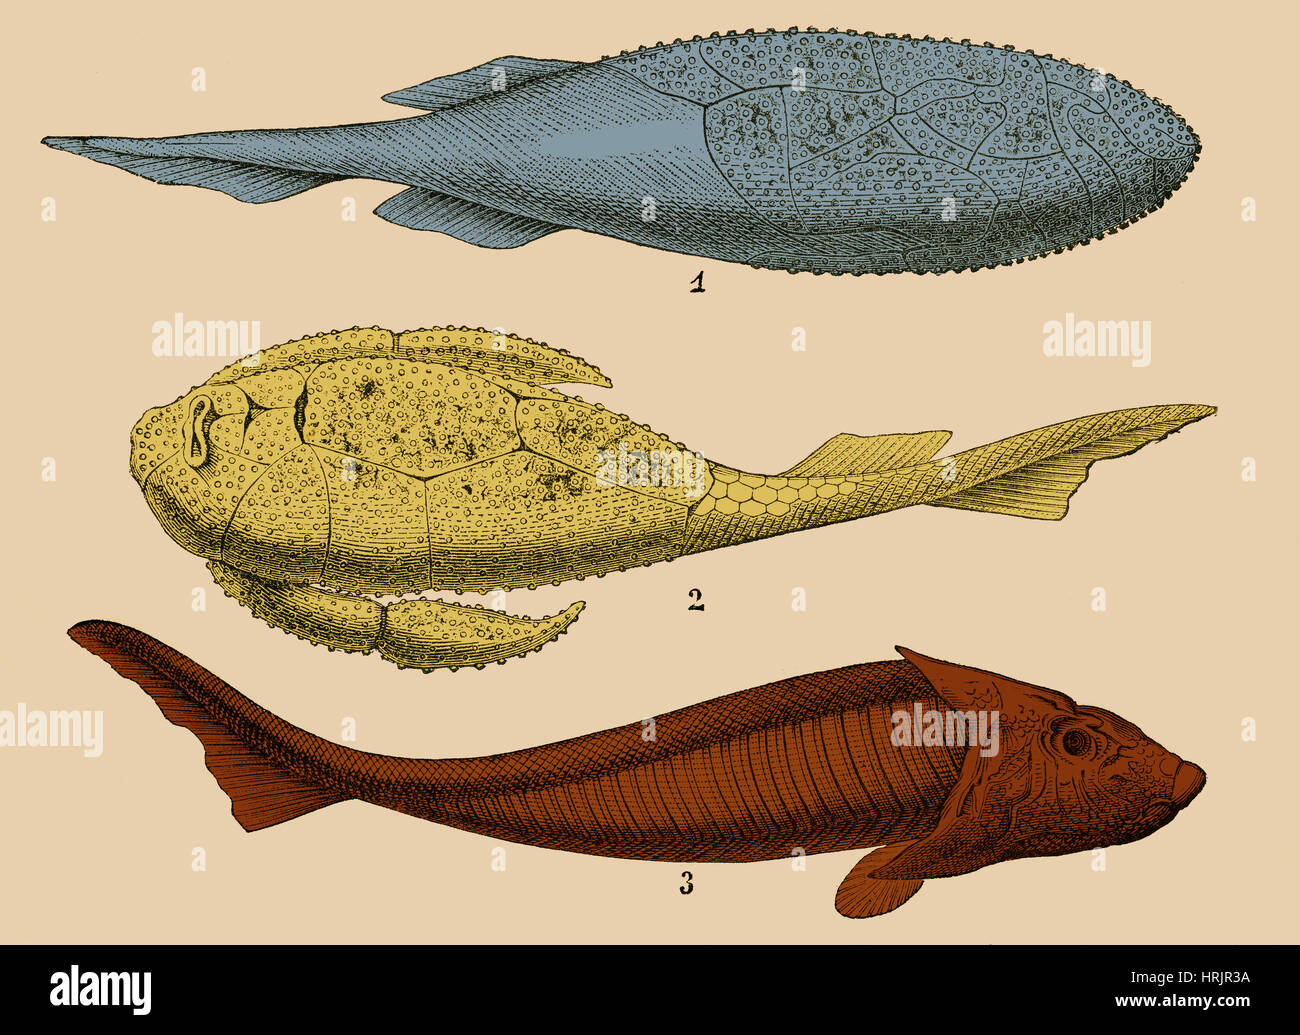 Armored Fishes, Illustration Stock Photo